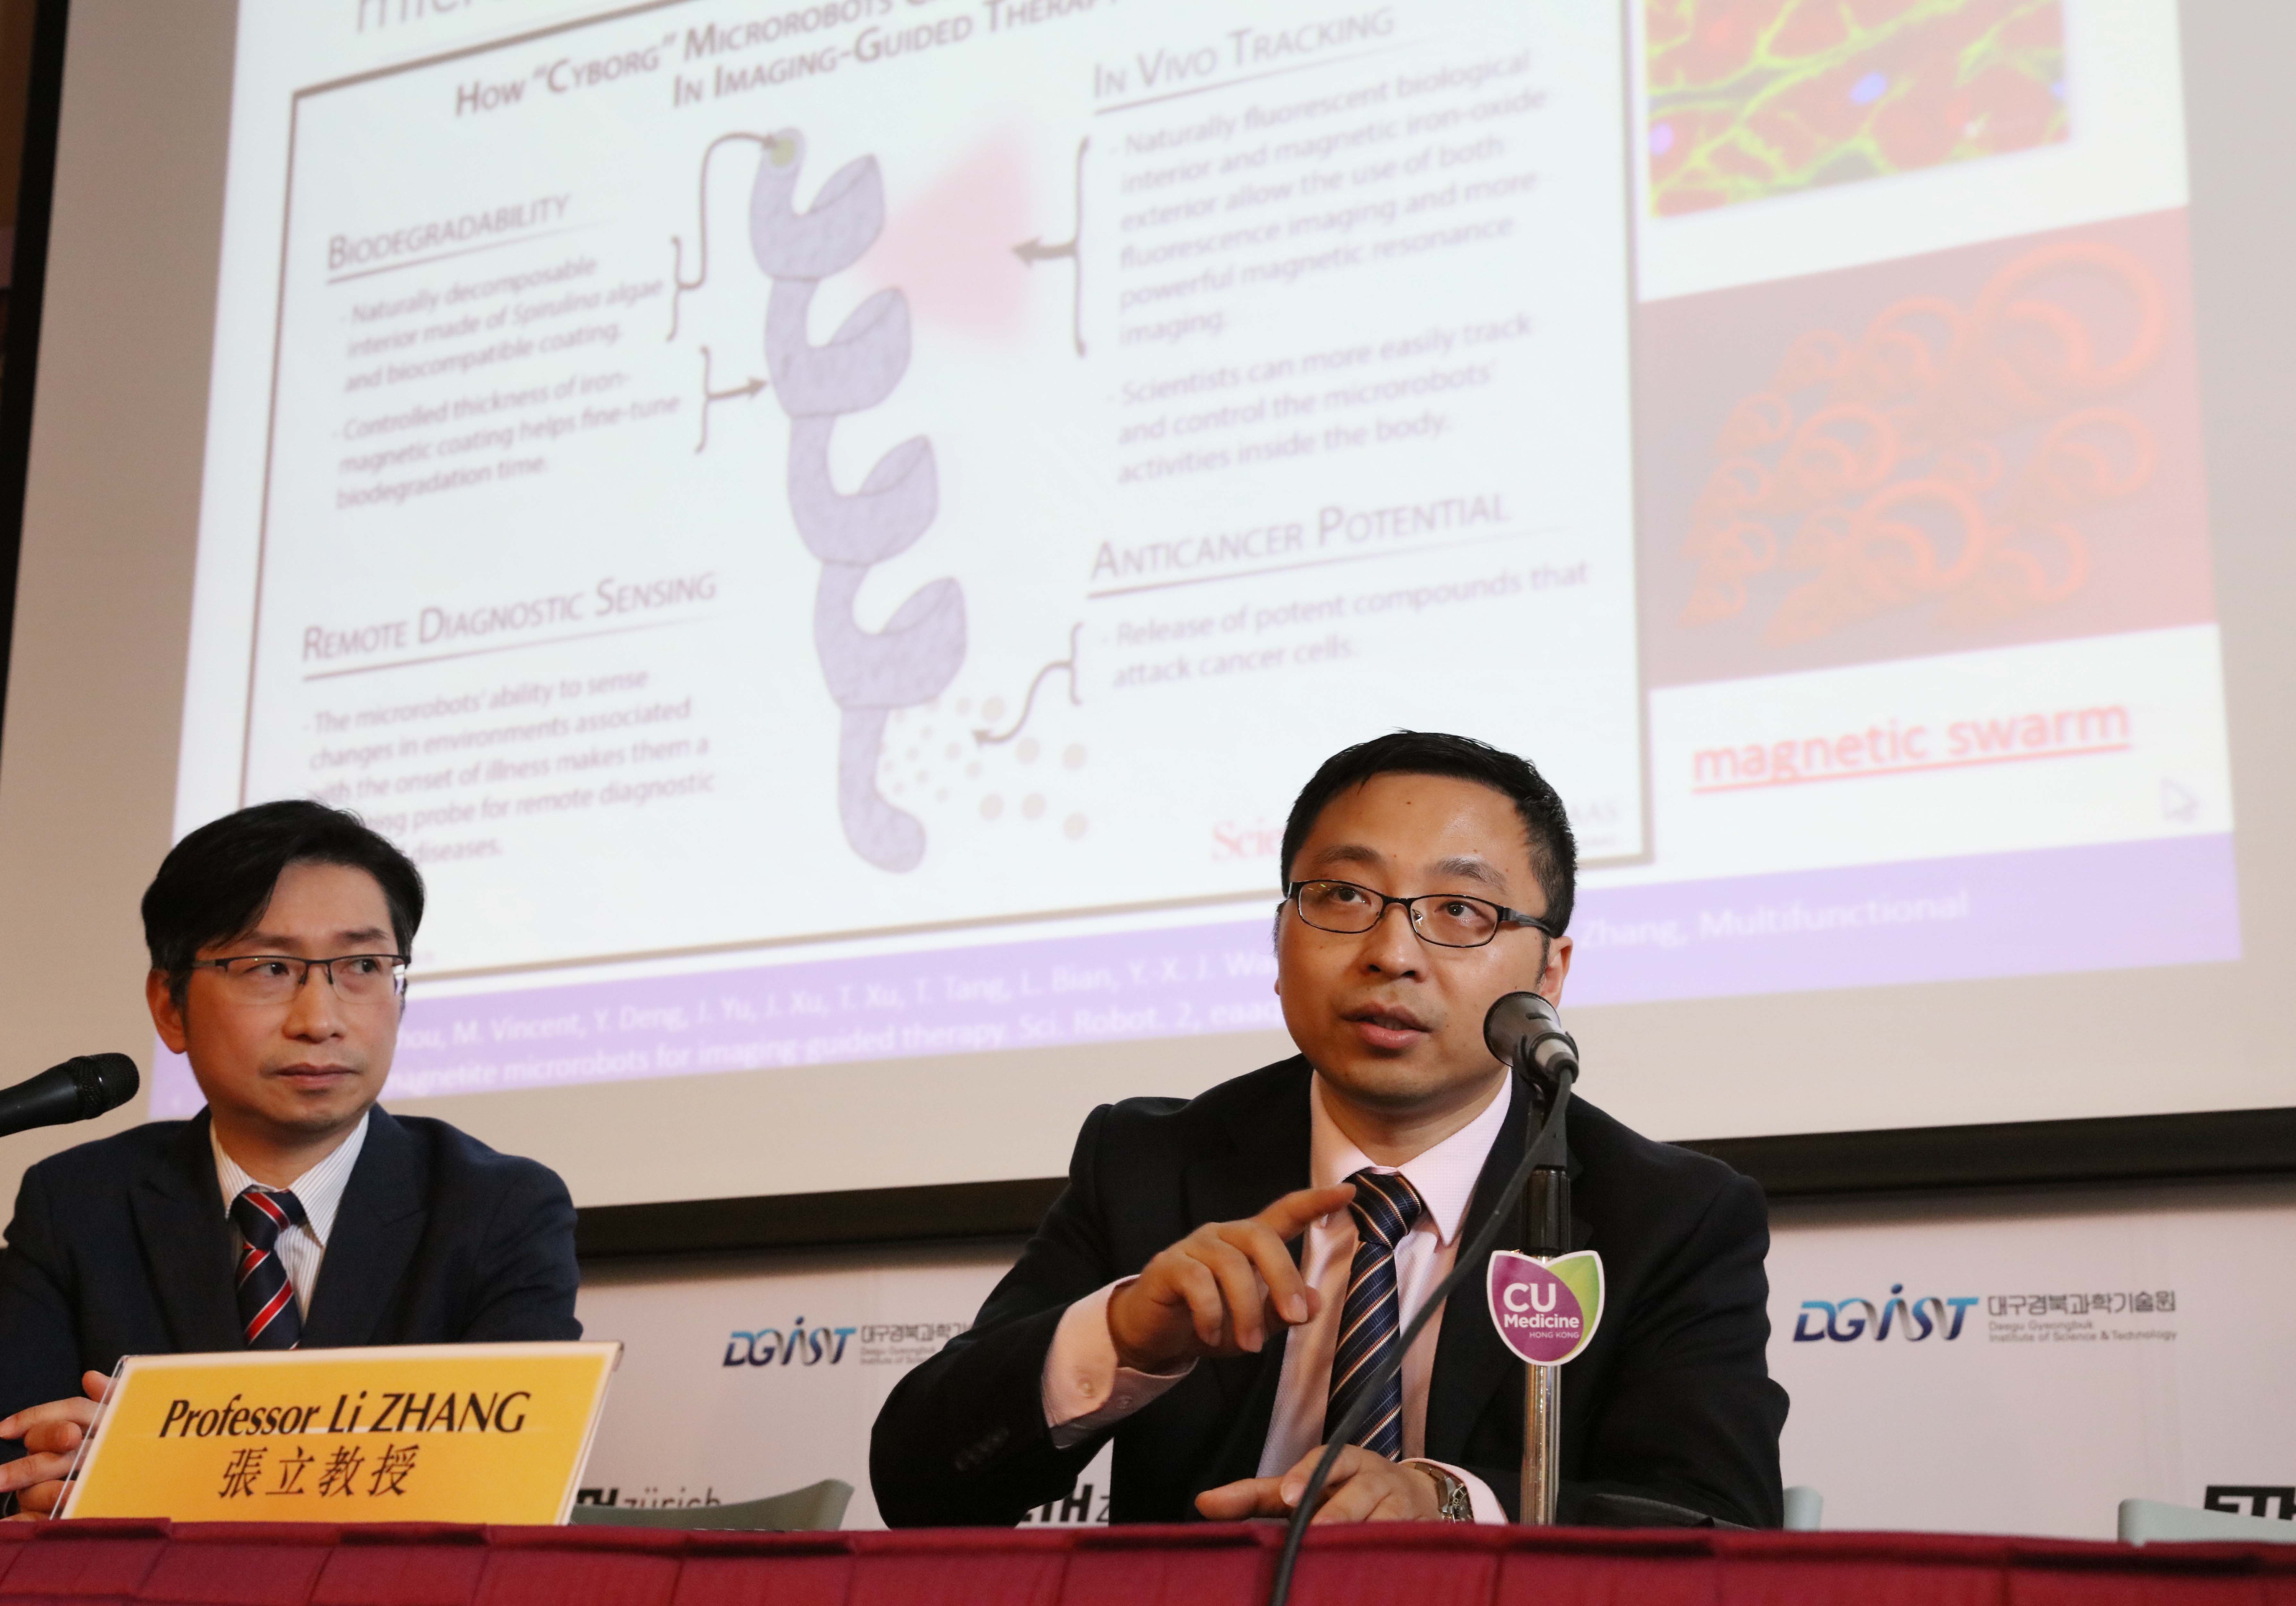 Prof. Li ZHANG (right) says in combination with endoscopy, microbots can help enhance the imaging contrast, direct drug delivery and provide localized therapy with high precision in vivo.